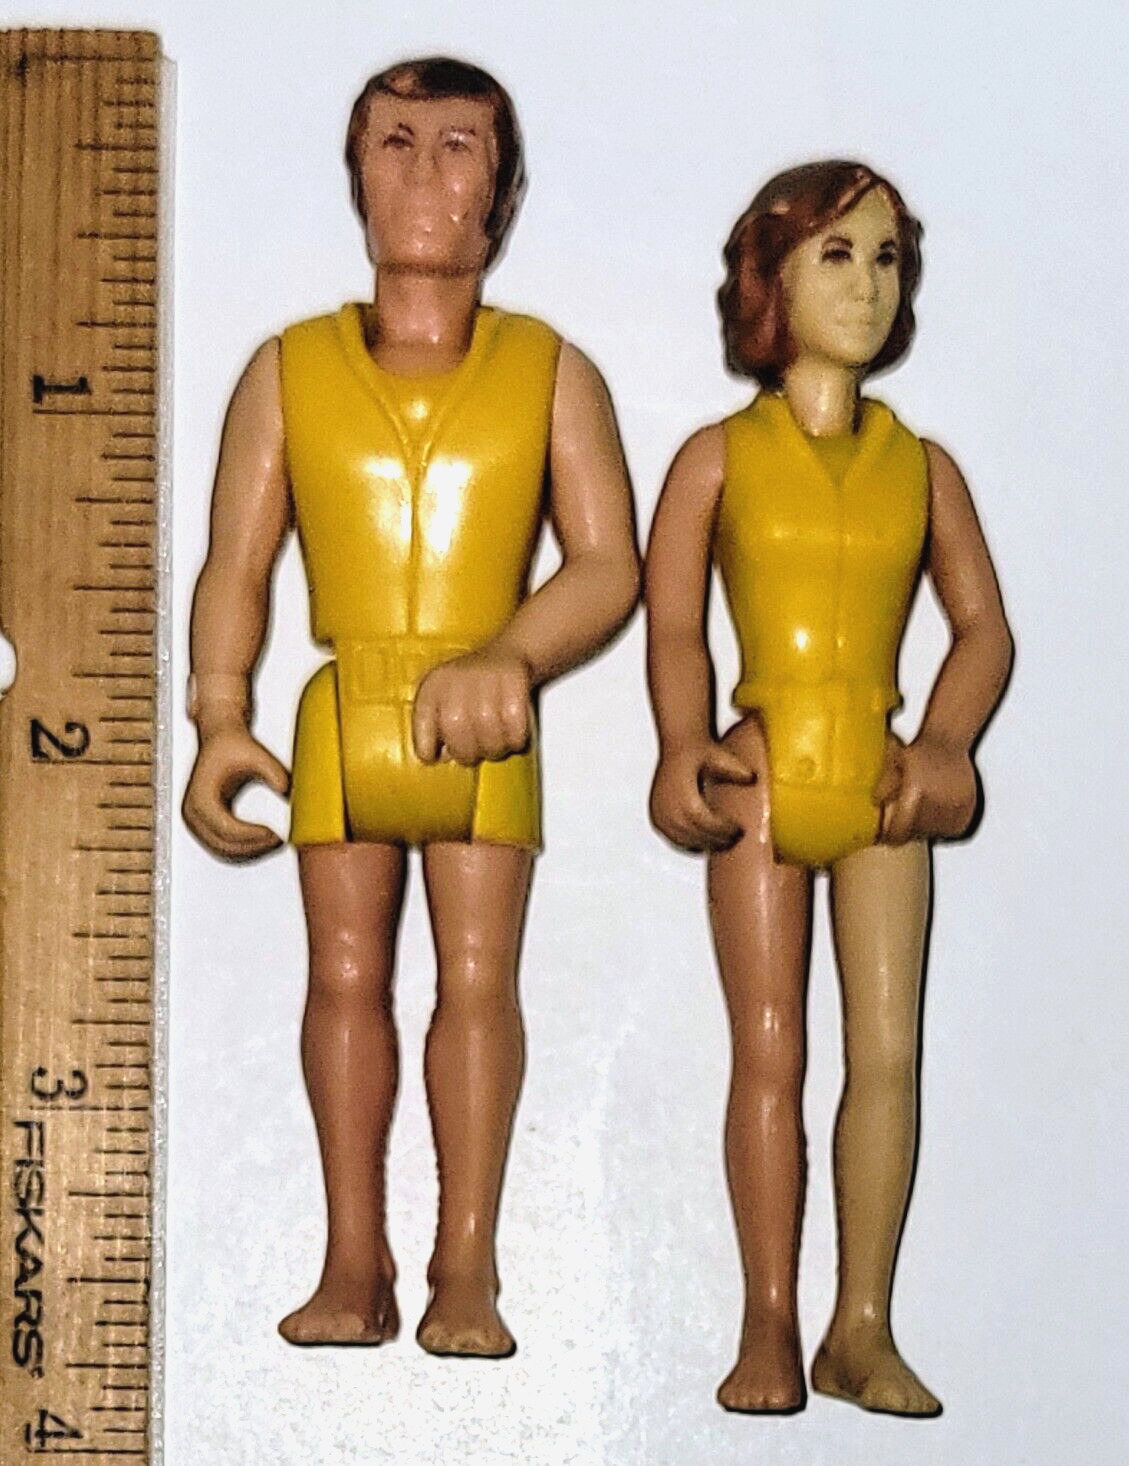 $5 OFF ~ VTG 1974 Fisher Price Adventure Swimmers Dolphin Male & Female Figures